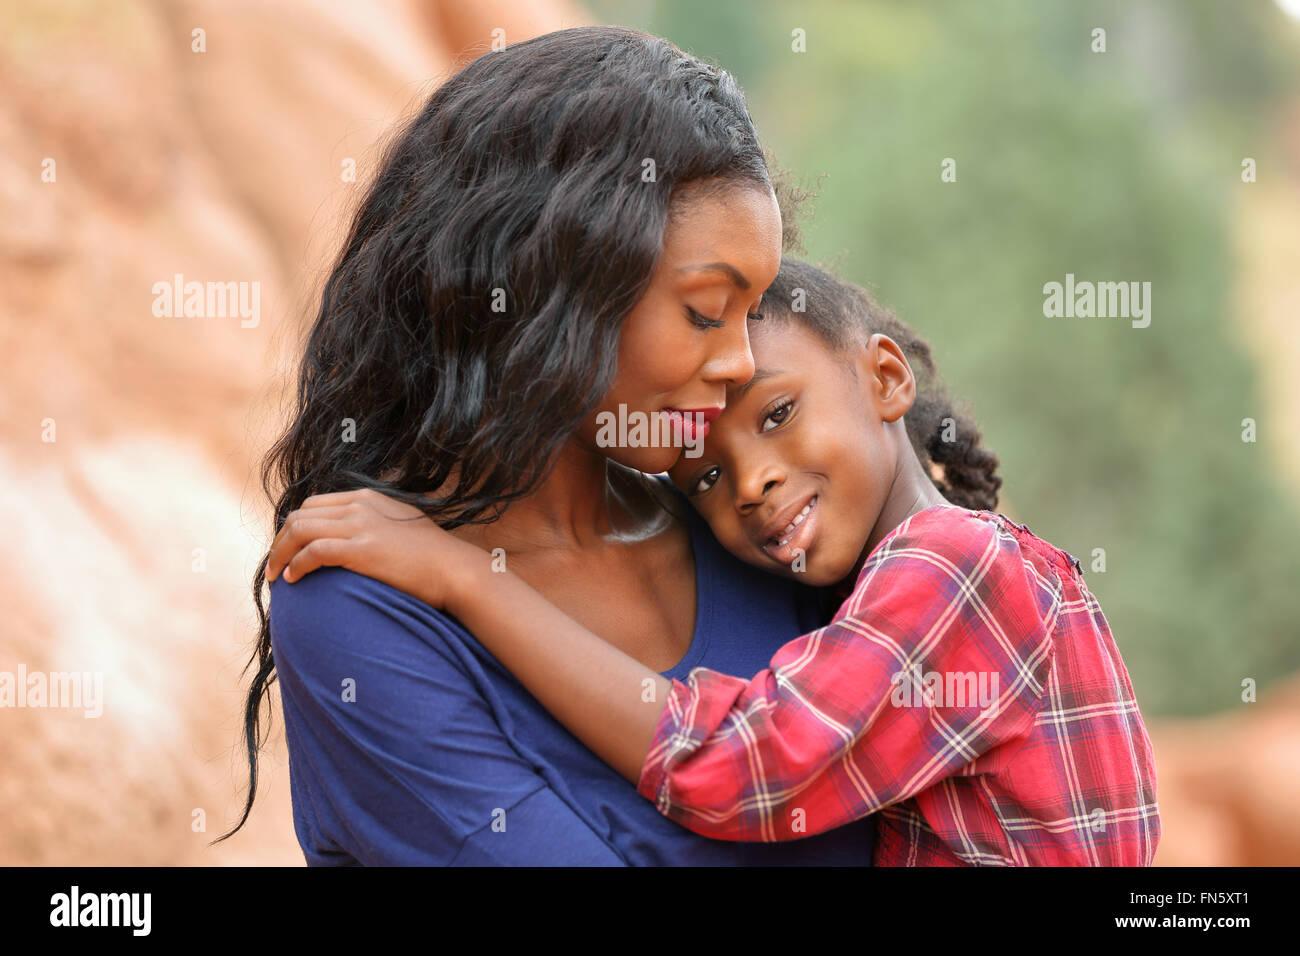 Loving mother comforting her little daughter Stock Photo